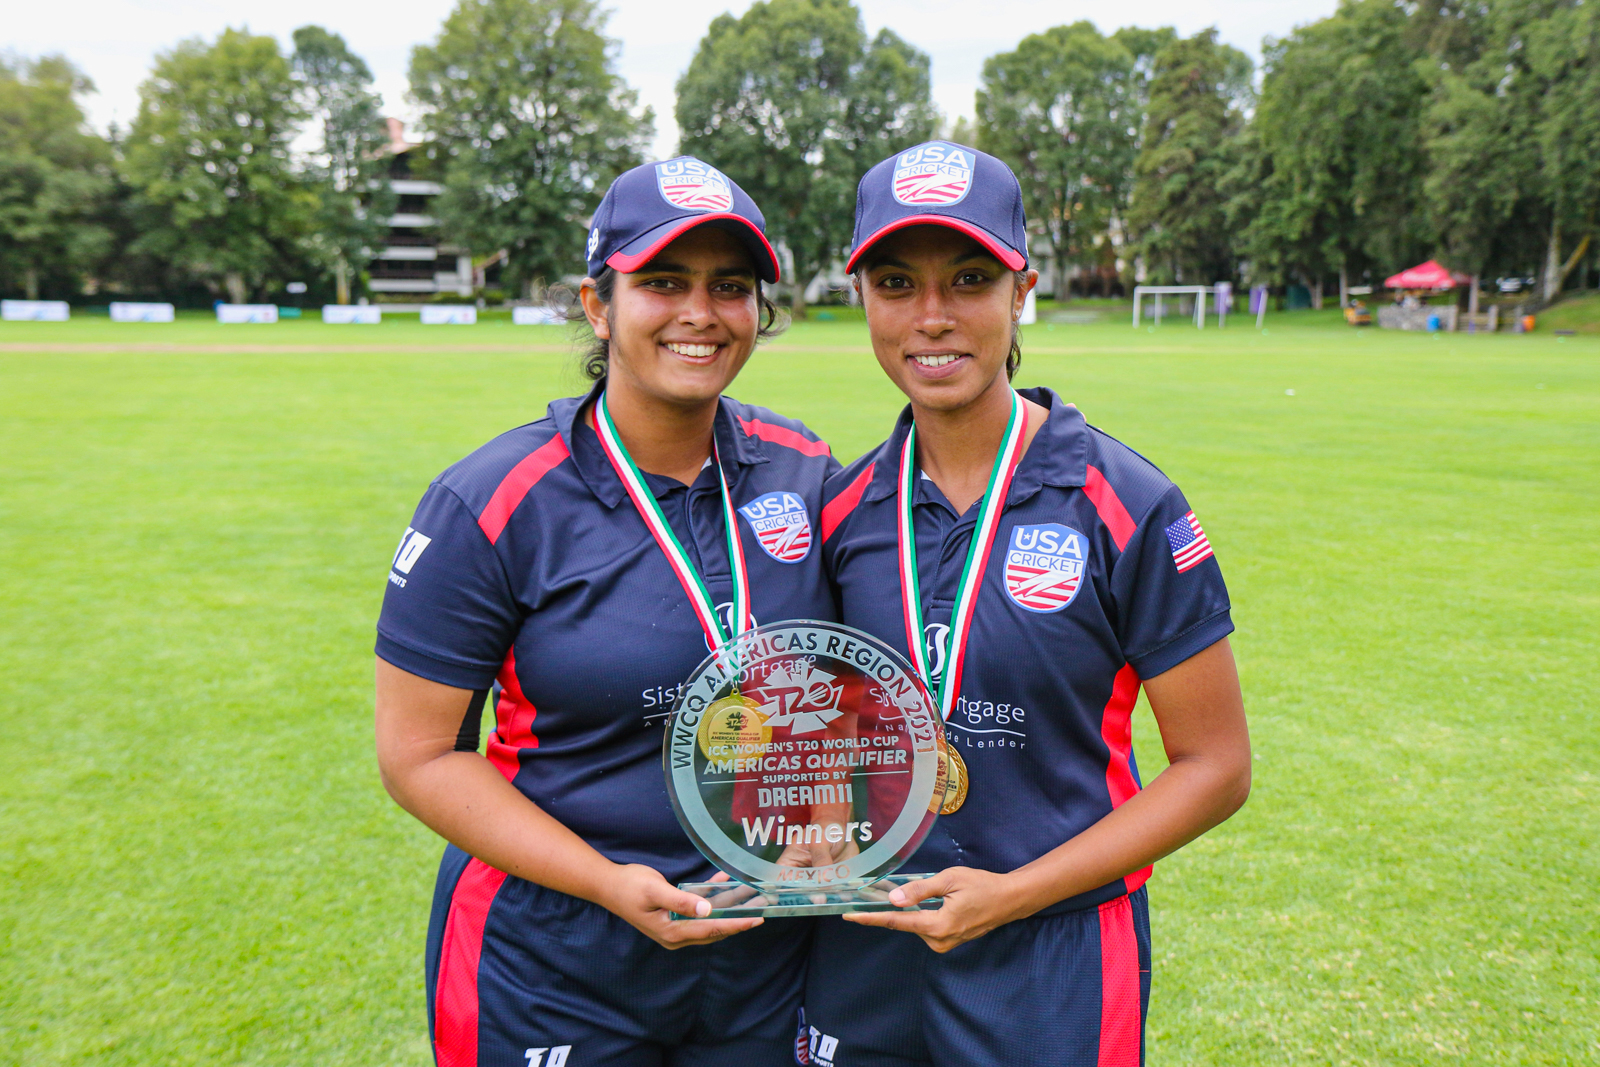 Strong USA Representation on Show as Stars of Women’s Game Gather in UAE for Fairbreak T20